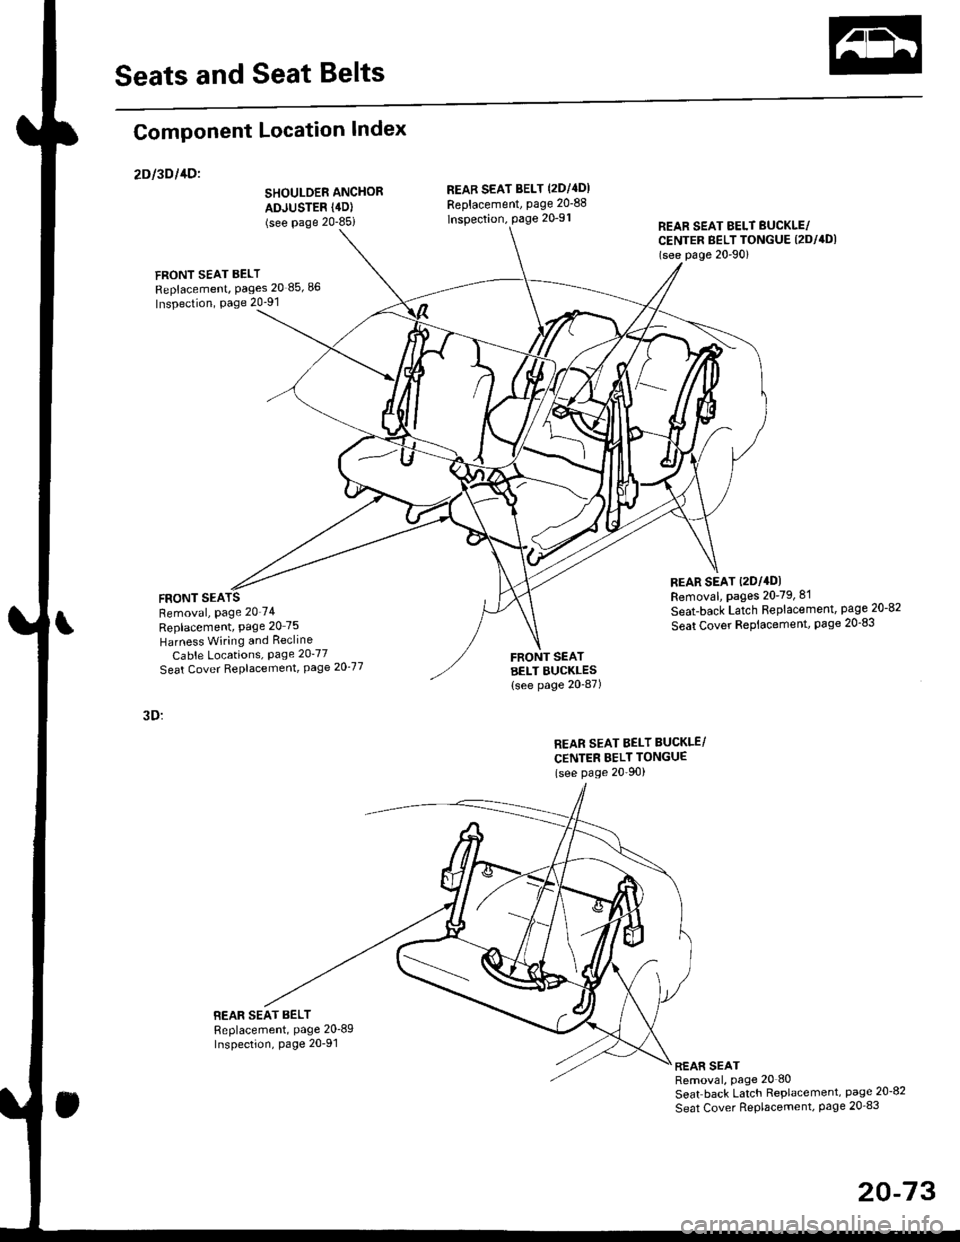 HONDA CIVIC 2000 6.G Workshop Manual Seats and Seat Belts
Component Location Index
2Dl3Dl1Dl
SHOULDER ANCHOR
ADJUSTER (4D)
(see Page 20-85i
FRONT SEAT BELT
Replacement, Pages 20 85,86
Inspection, Page 20-91
FRONT SEARemoval, Page 2074
R